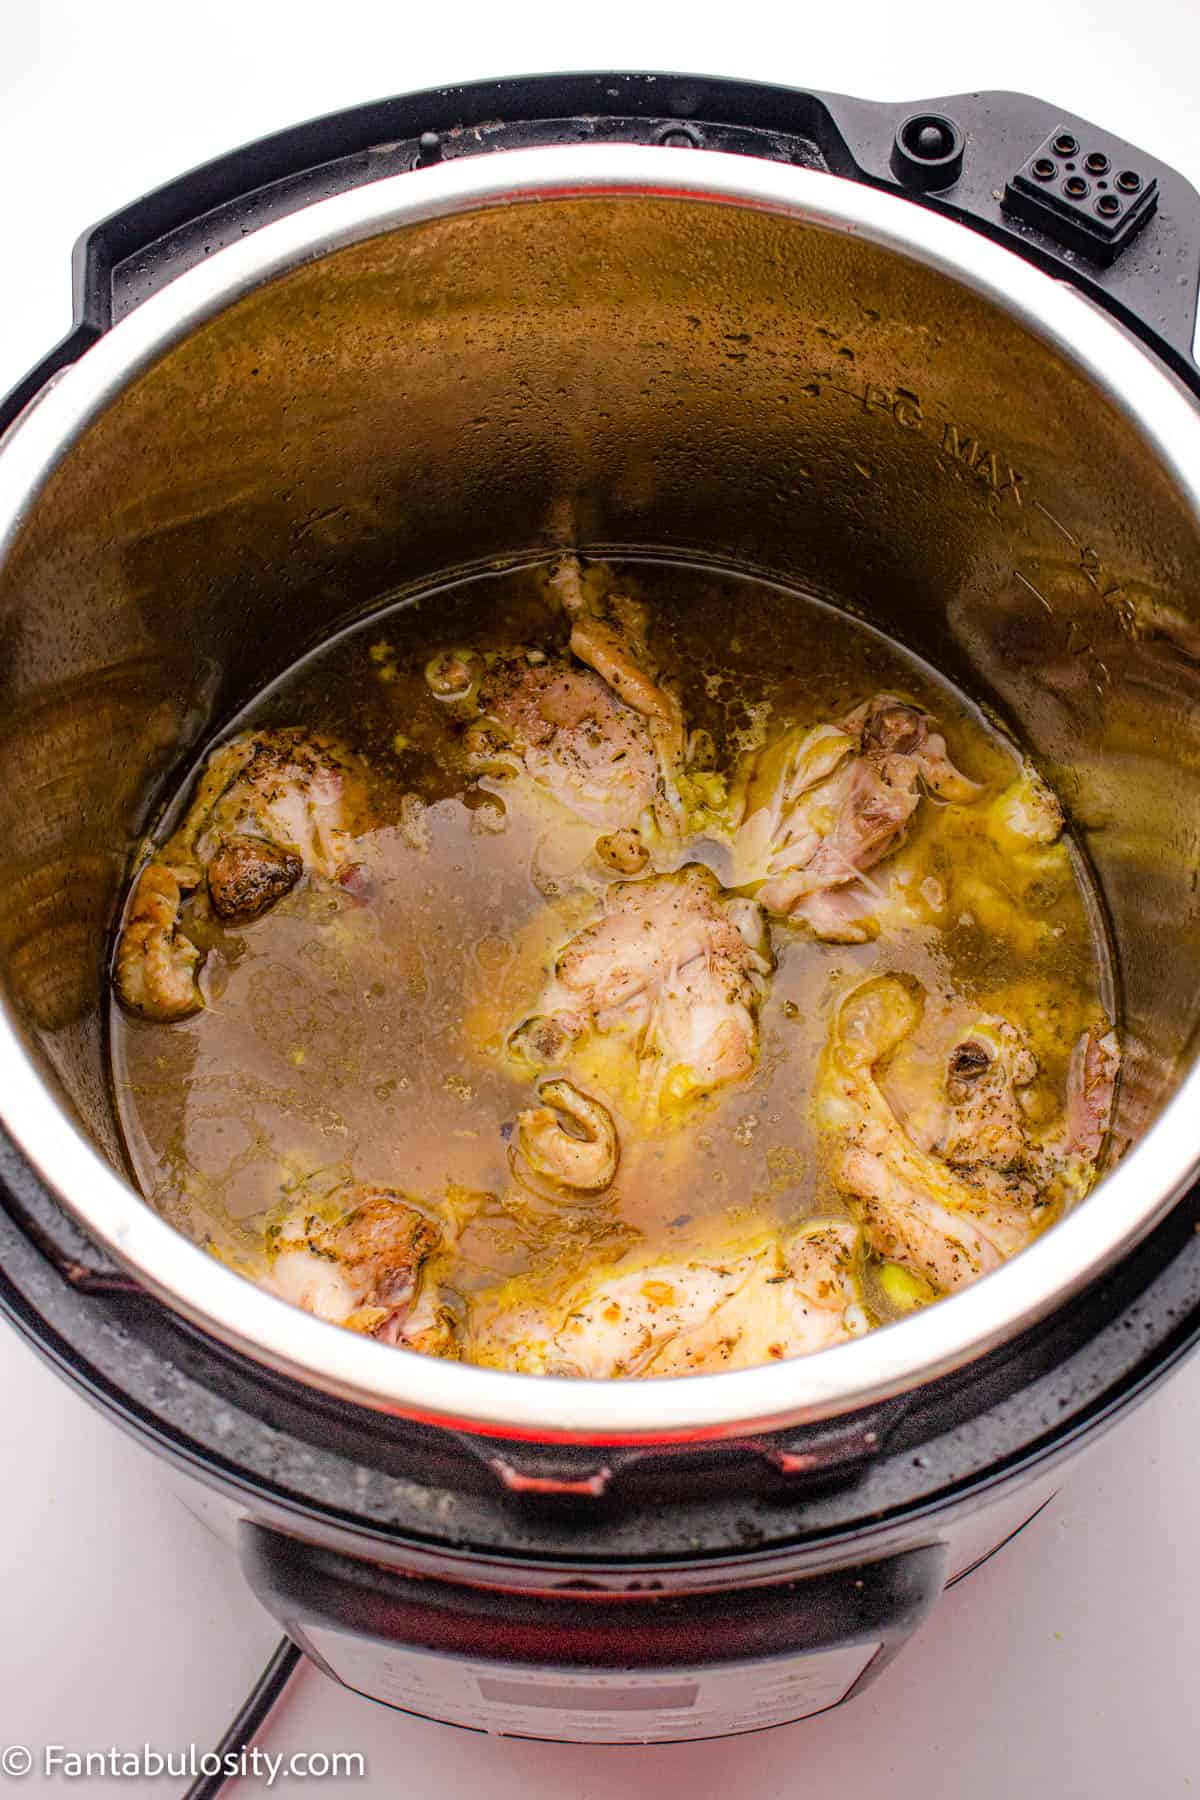 Add chicken stock to the Instant Pot.